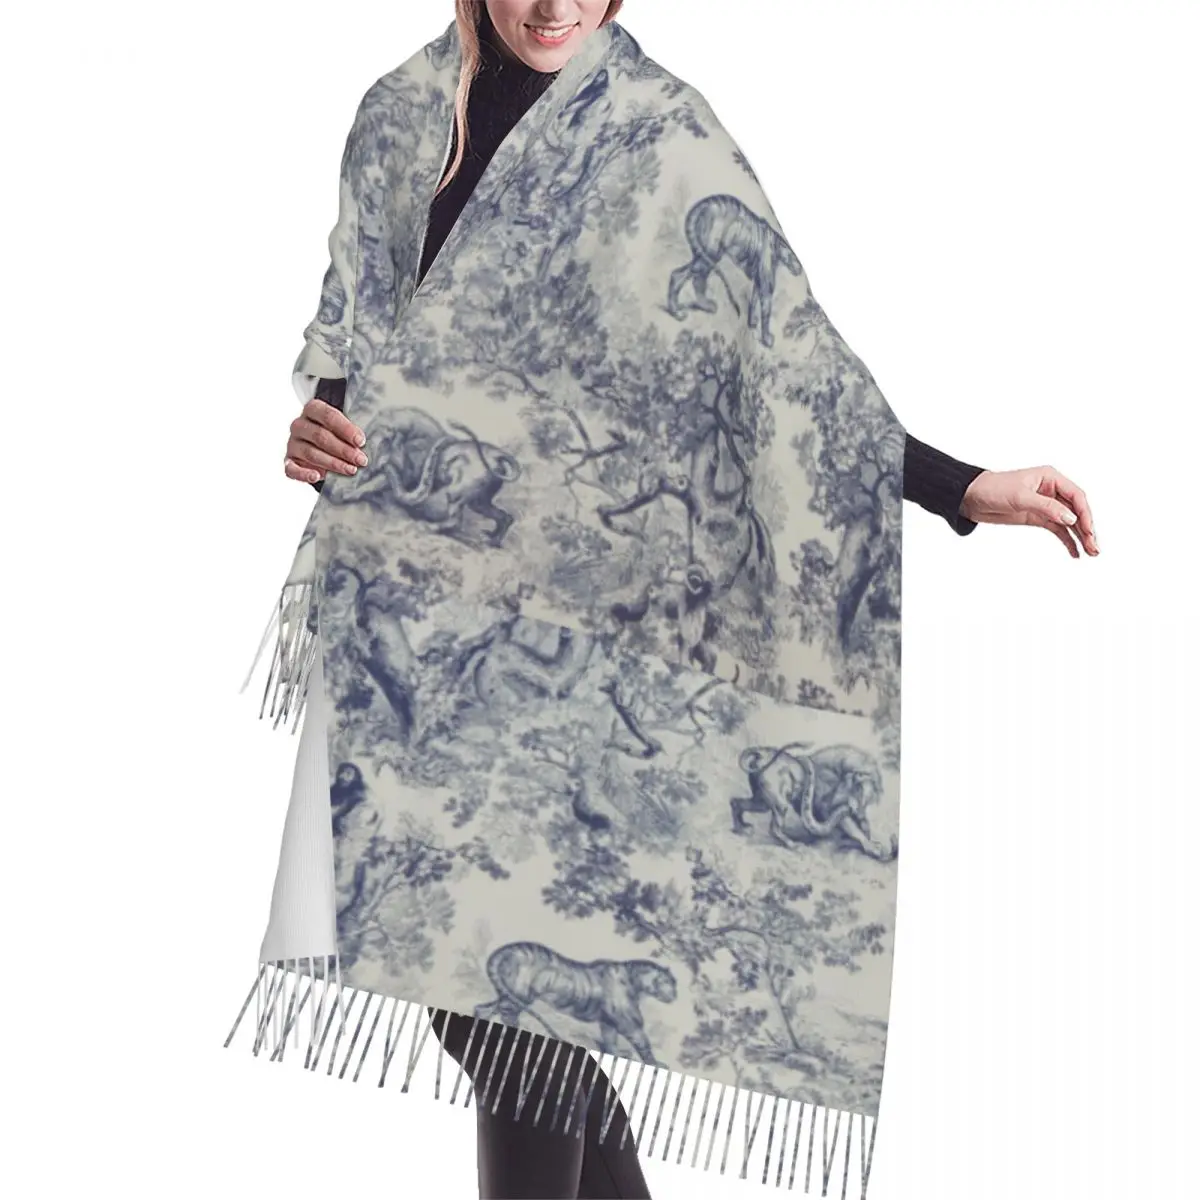 

Lady Long French Toile De Jouy Navy Blue Motif Scarves Women Winter Thick Warm Tassel Shawl Wraps Animal Forest Floral Art Scarf